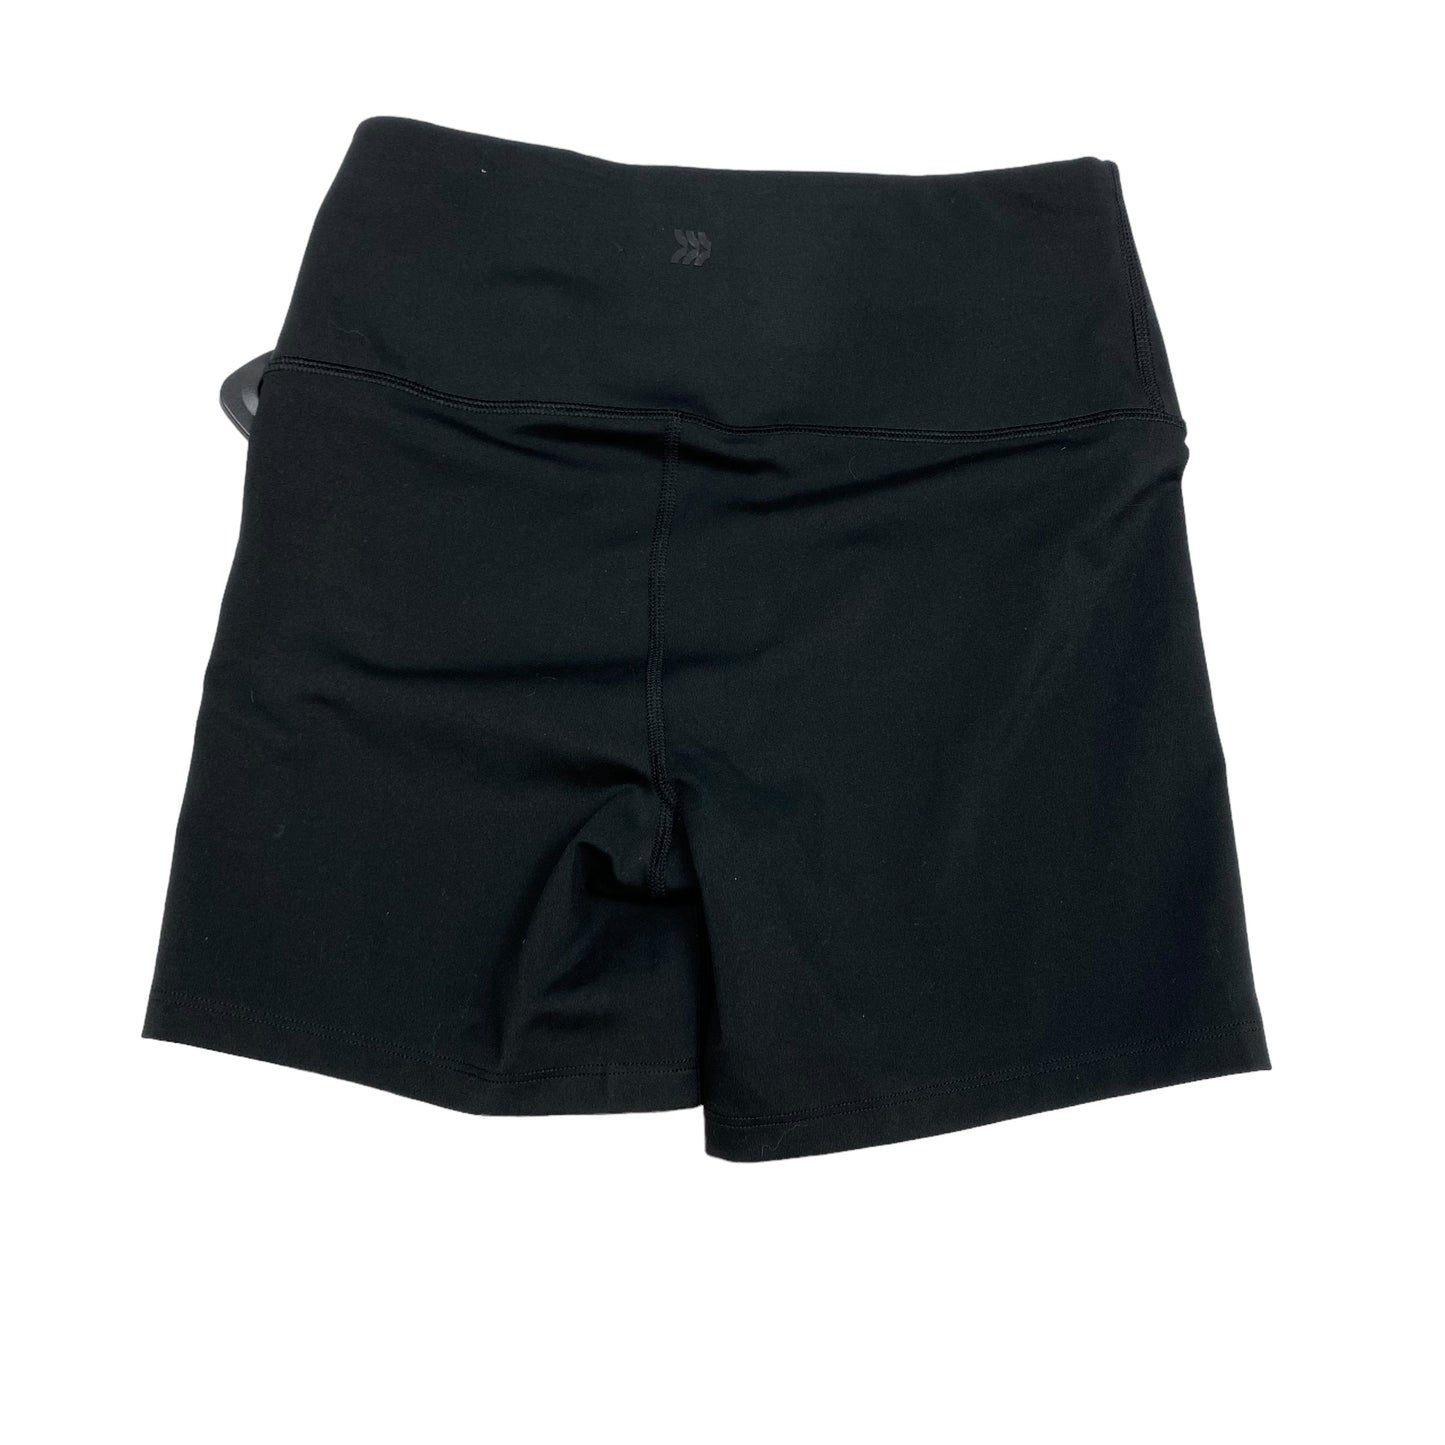 Black Athletic Shorts All In Motion, Size S